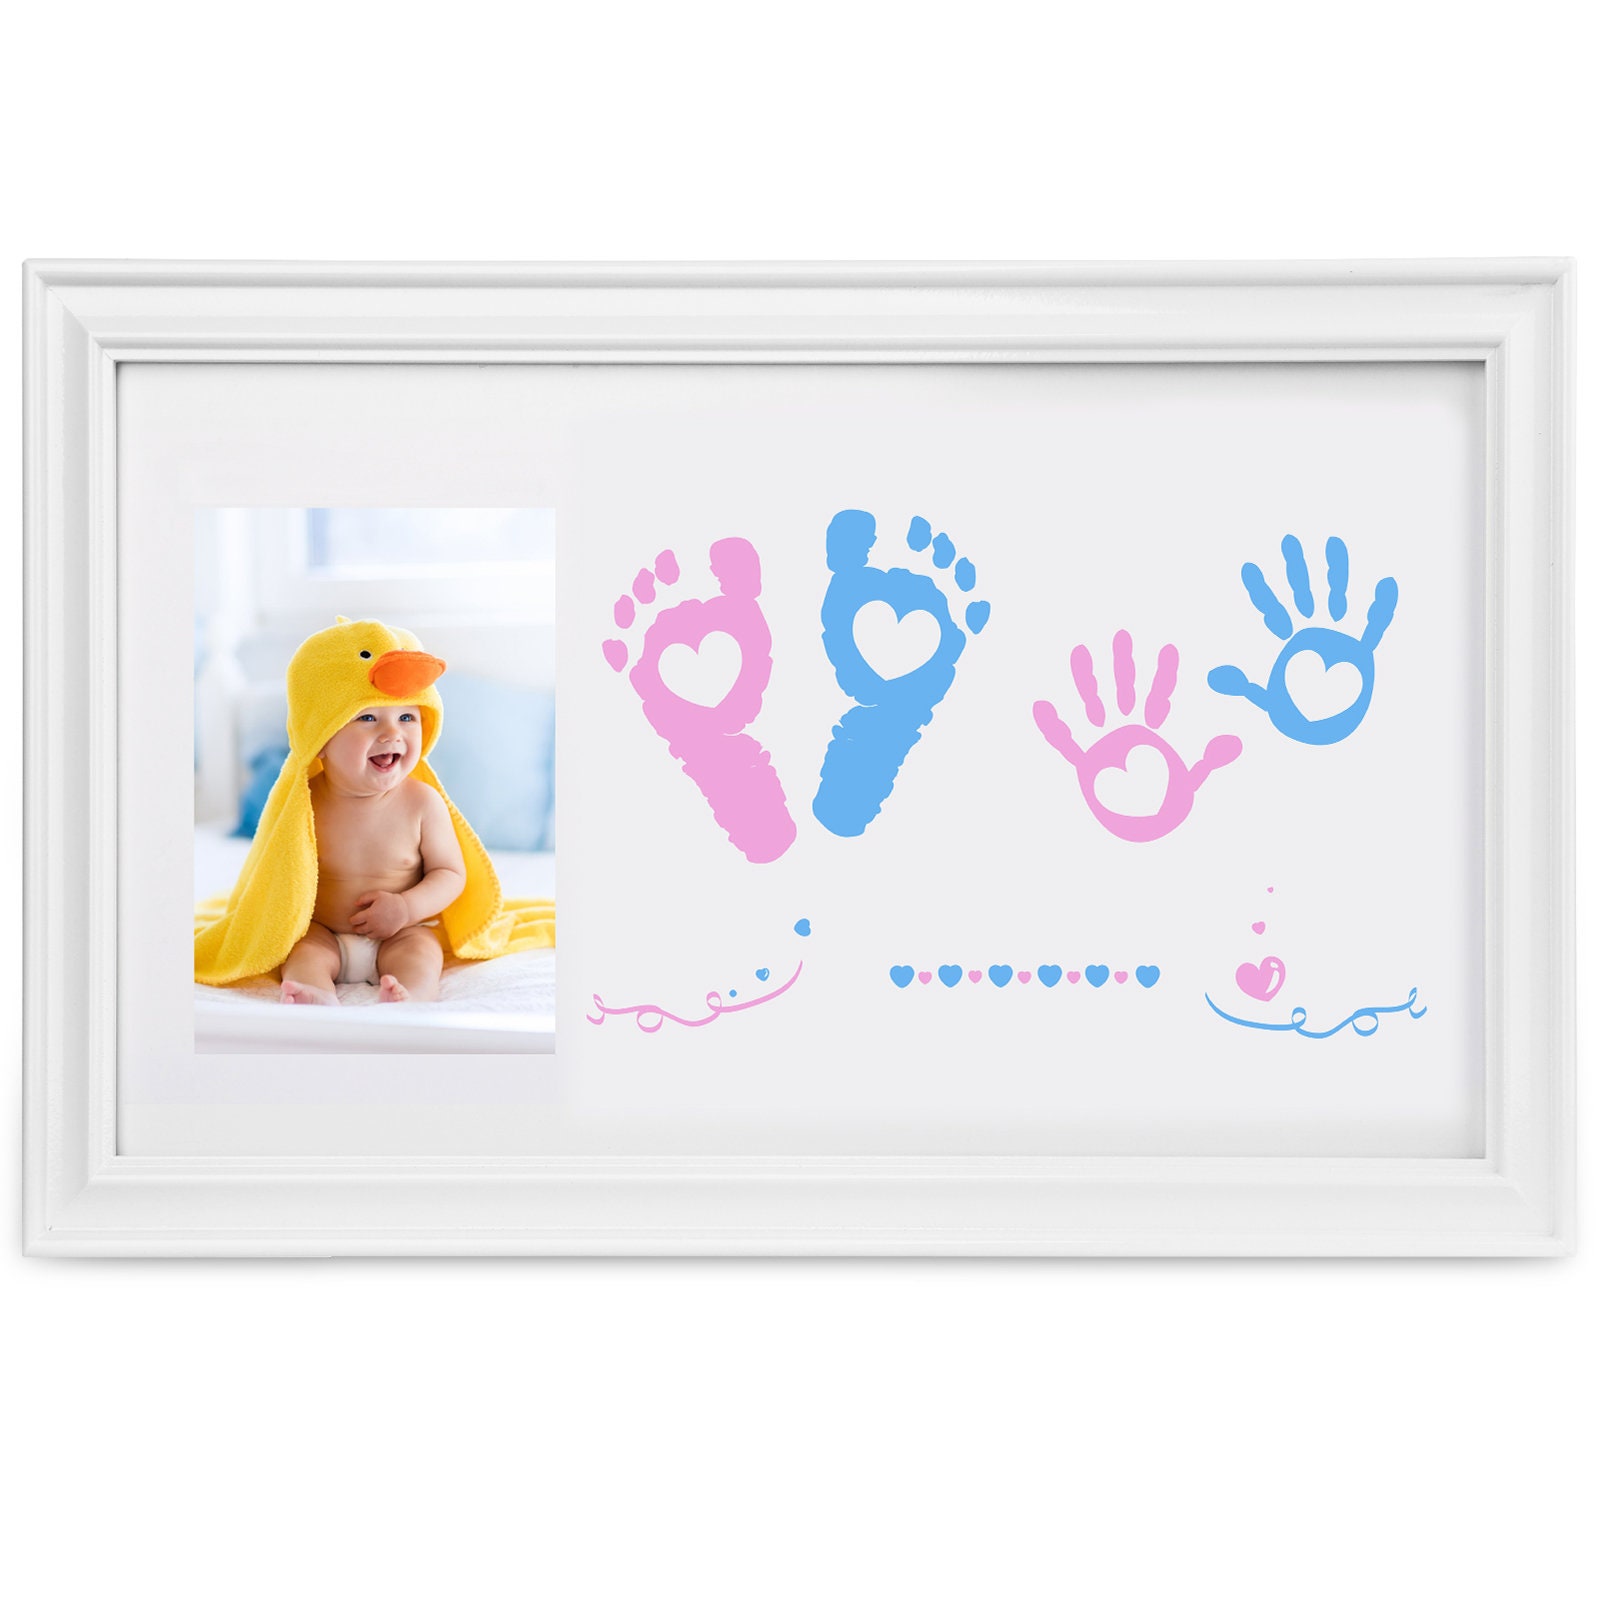 🍒Cherry Cheers🍒 Family Handprint and Paint Craft Kit DIY Baby Keepsake  Frame, All Transparent Layers Non-Toxic Paints